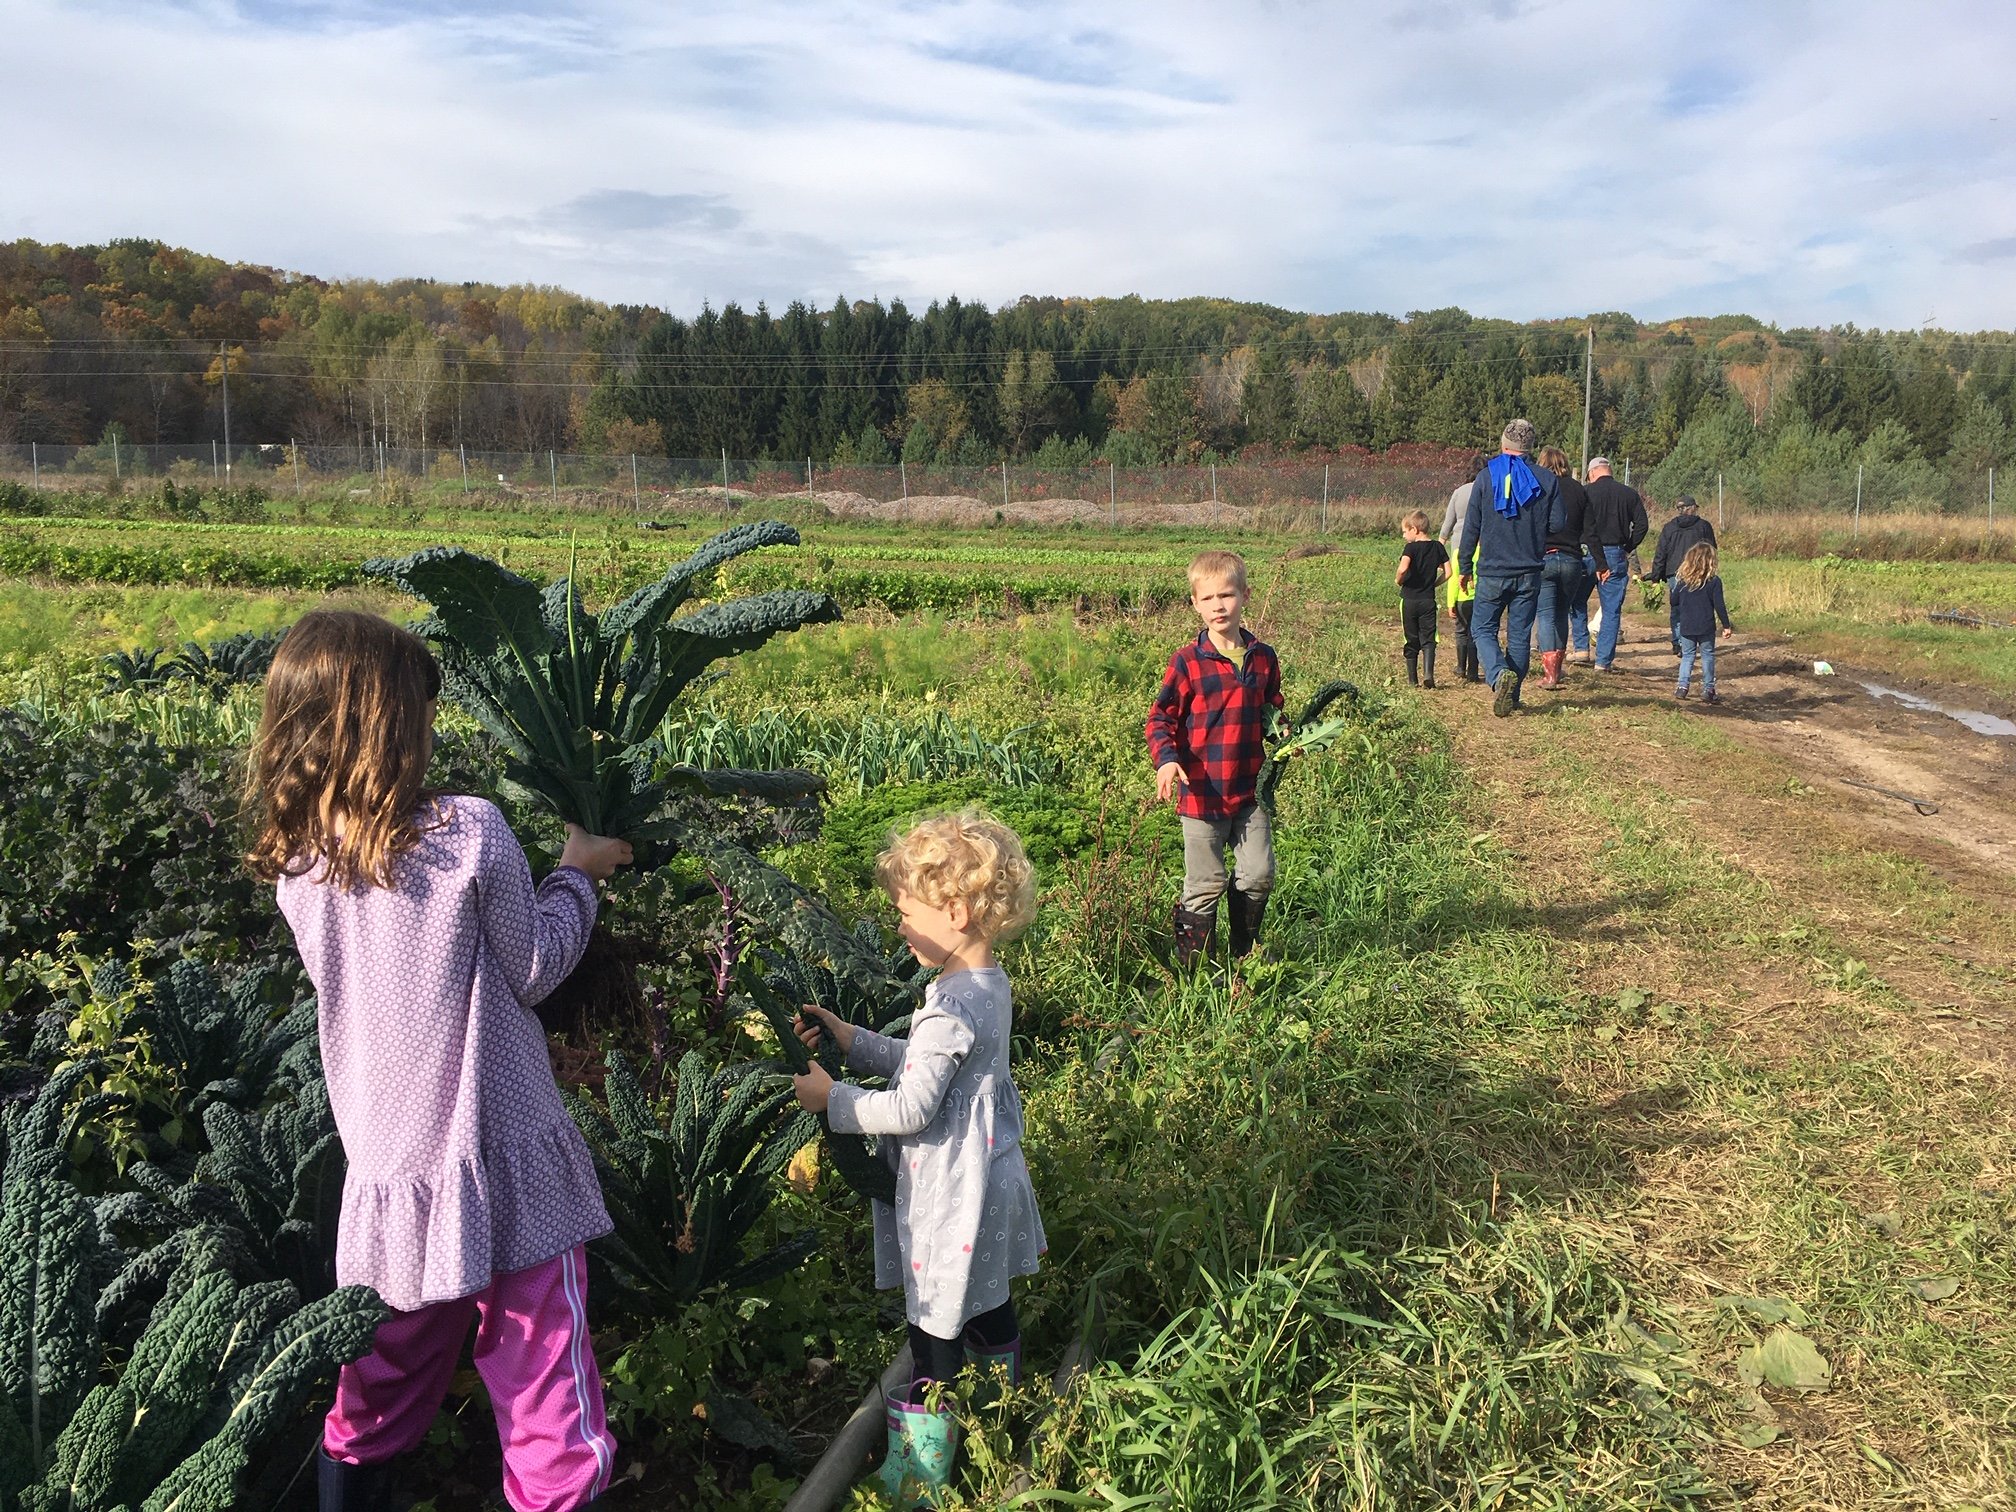 Previous Happening: Farm Happenings for October 23, 2019